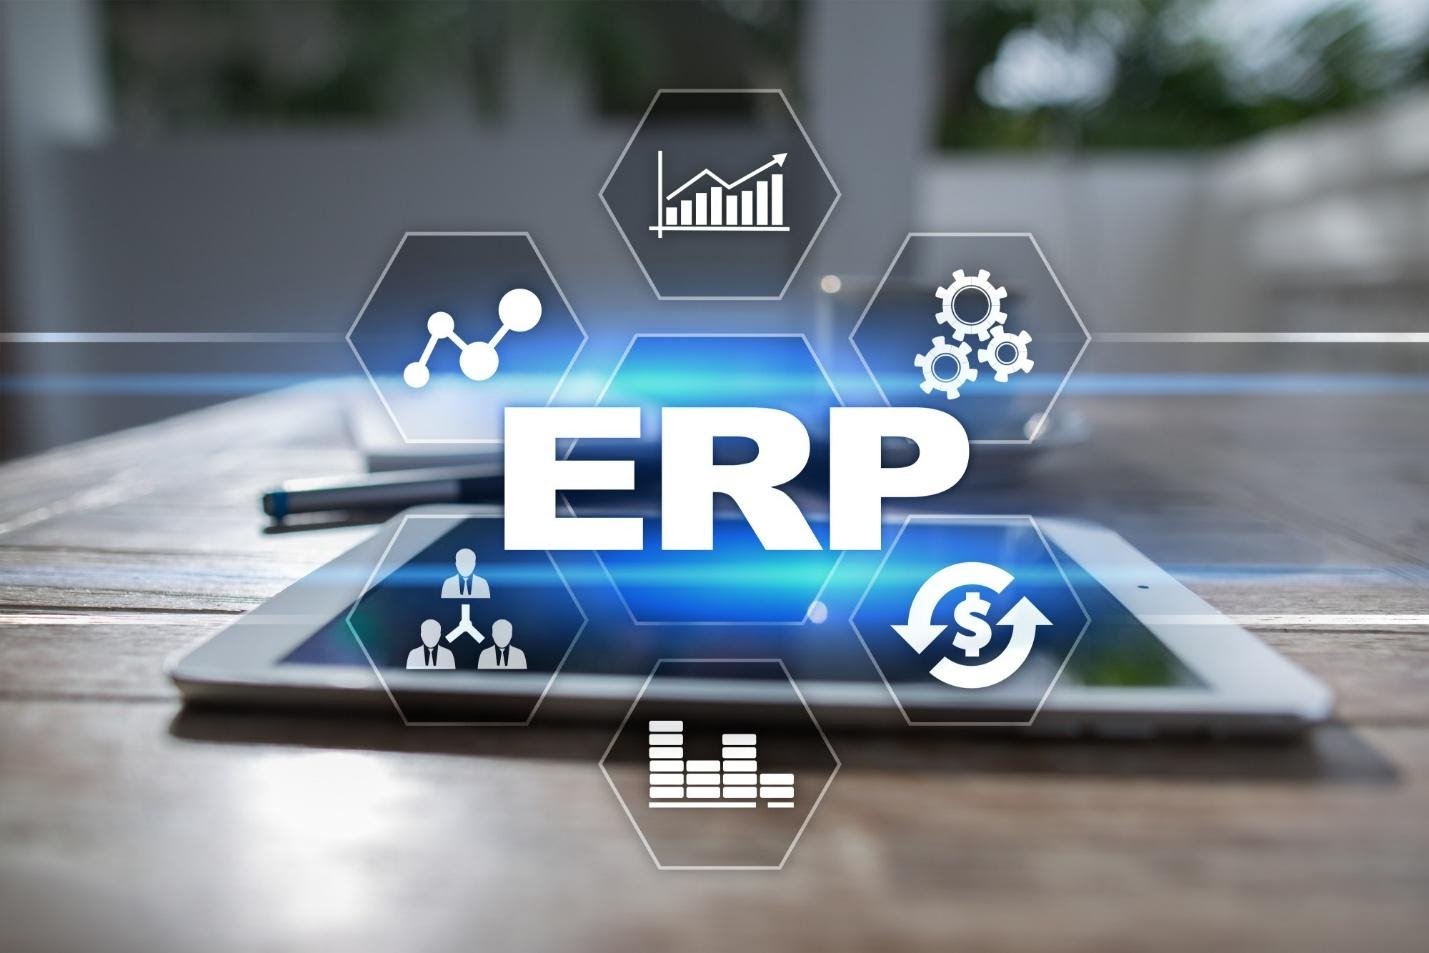 What to Look for When Choosing an ERP Provider